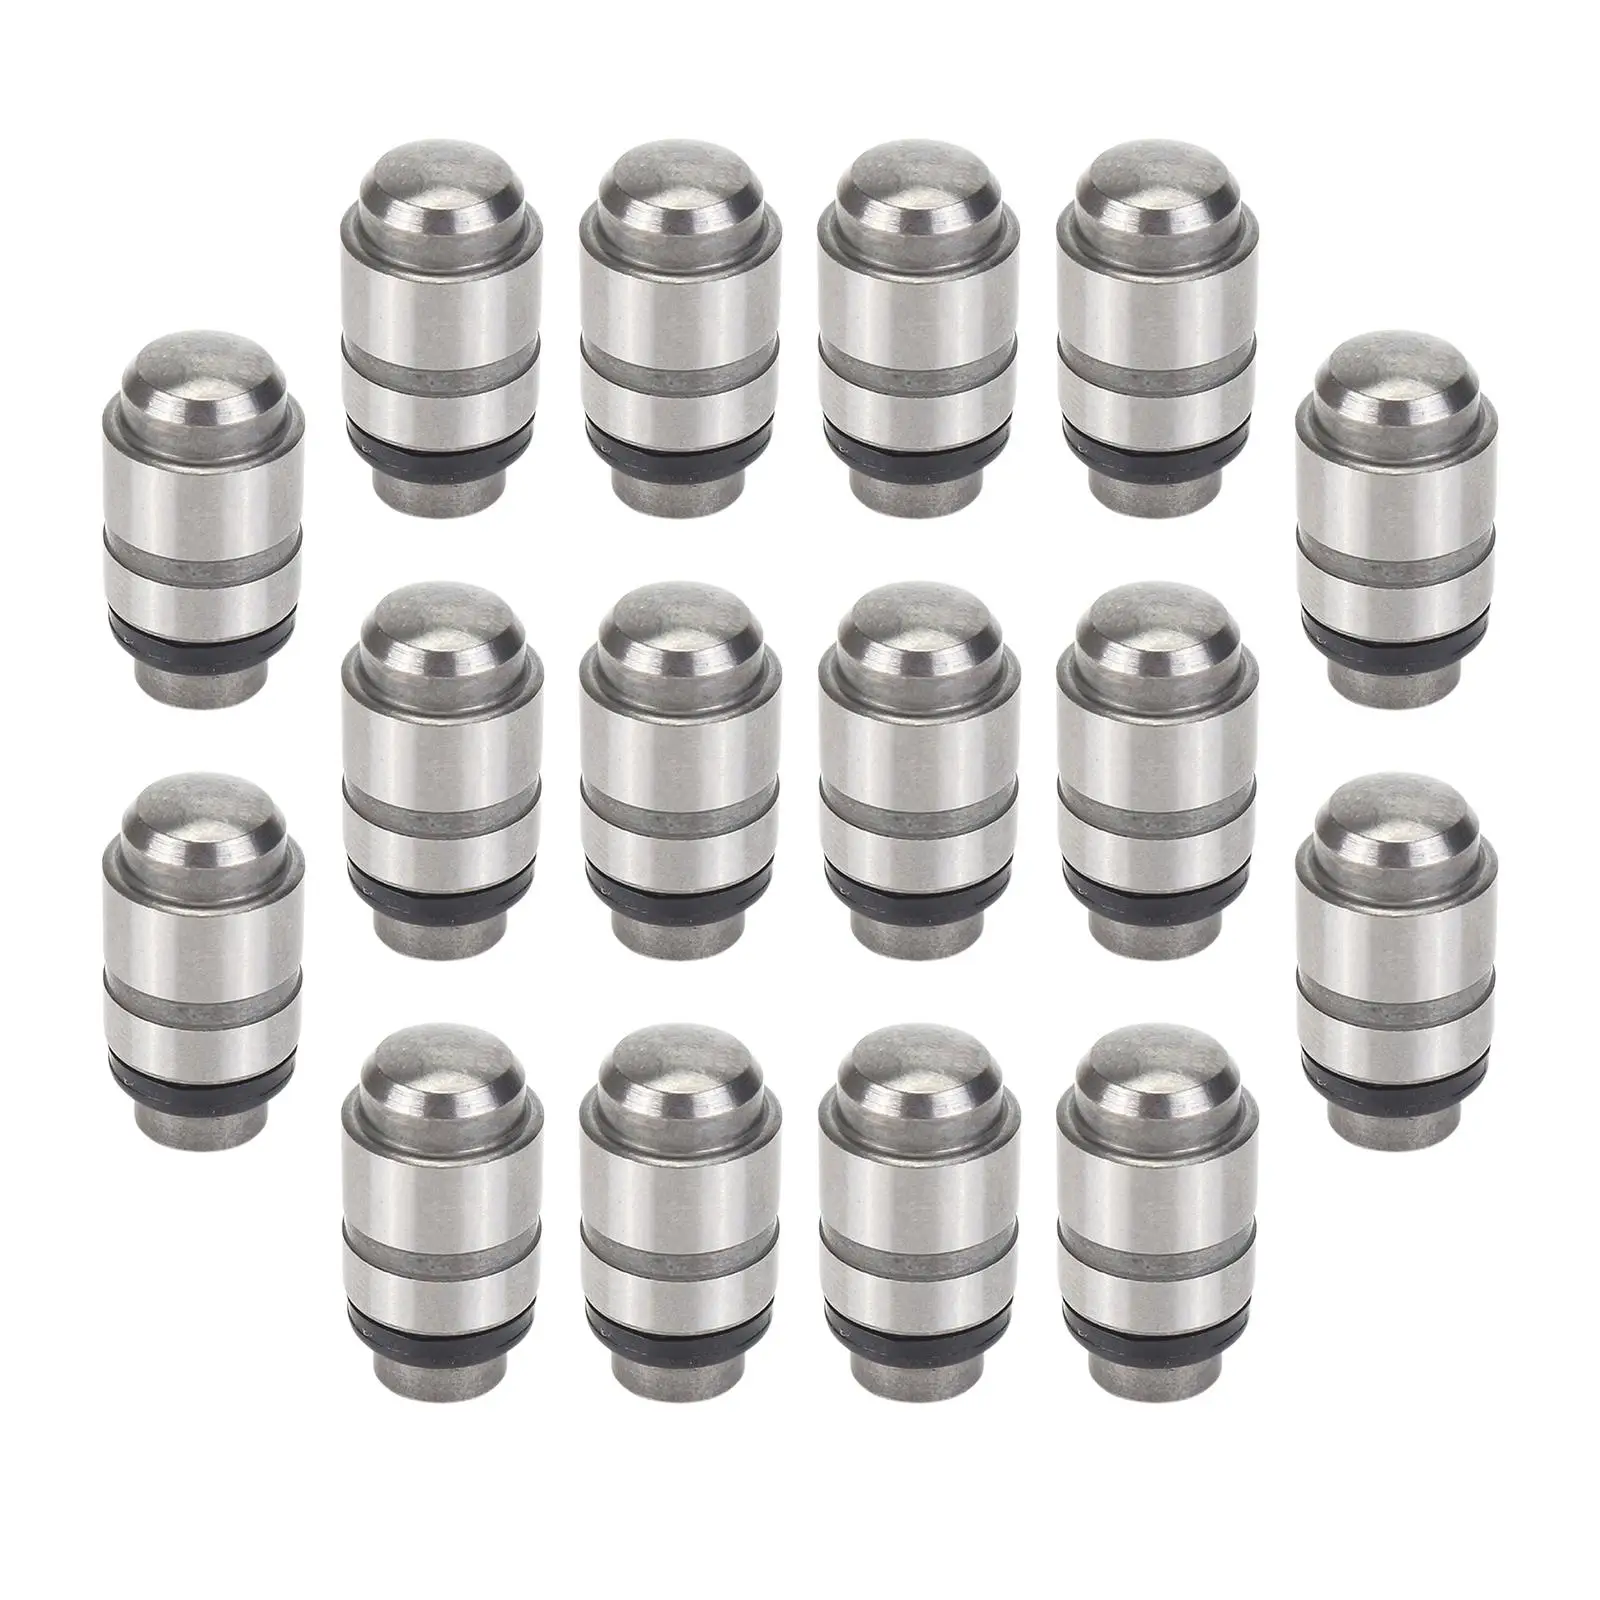 Set of 16 Valve Tappets Lifters Kit Auto Parts Silver Assemblies Replaces Fit for Mitsubishi 2.5L 3.0L 2131753 Car Supplies